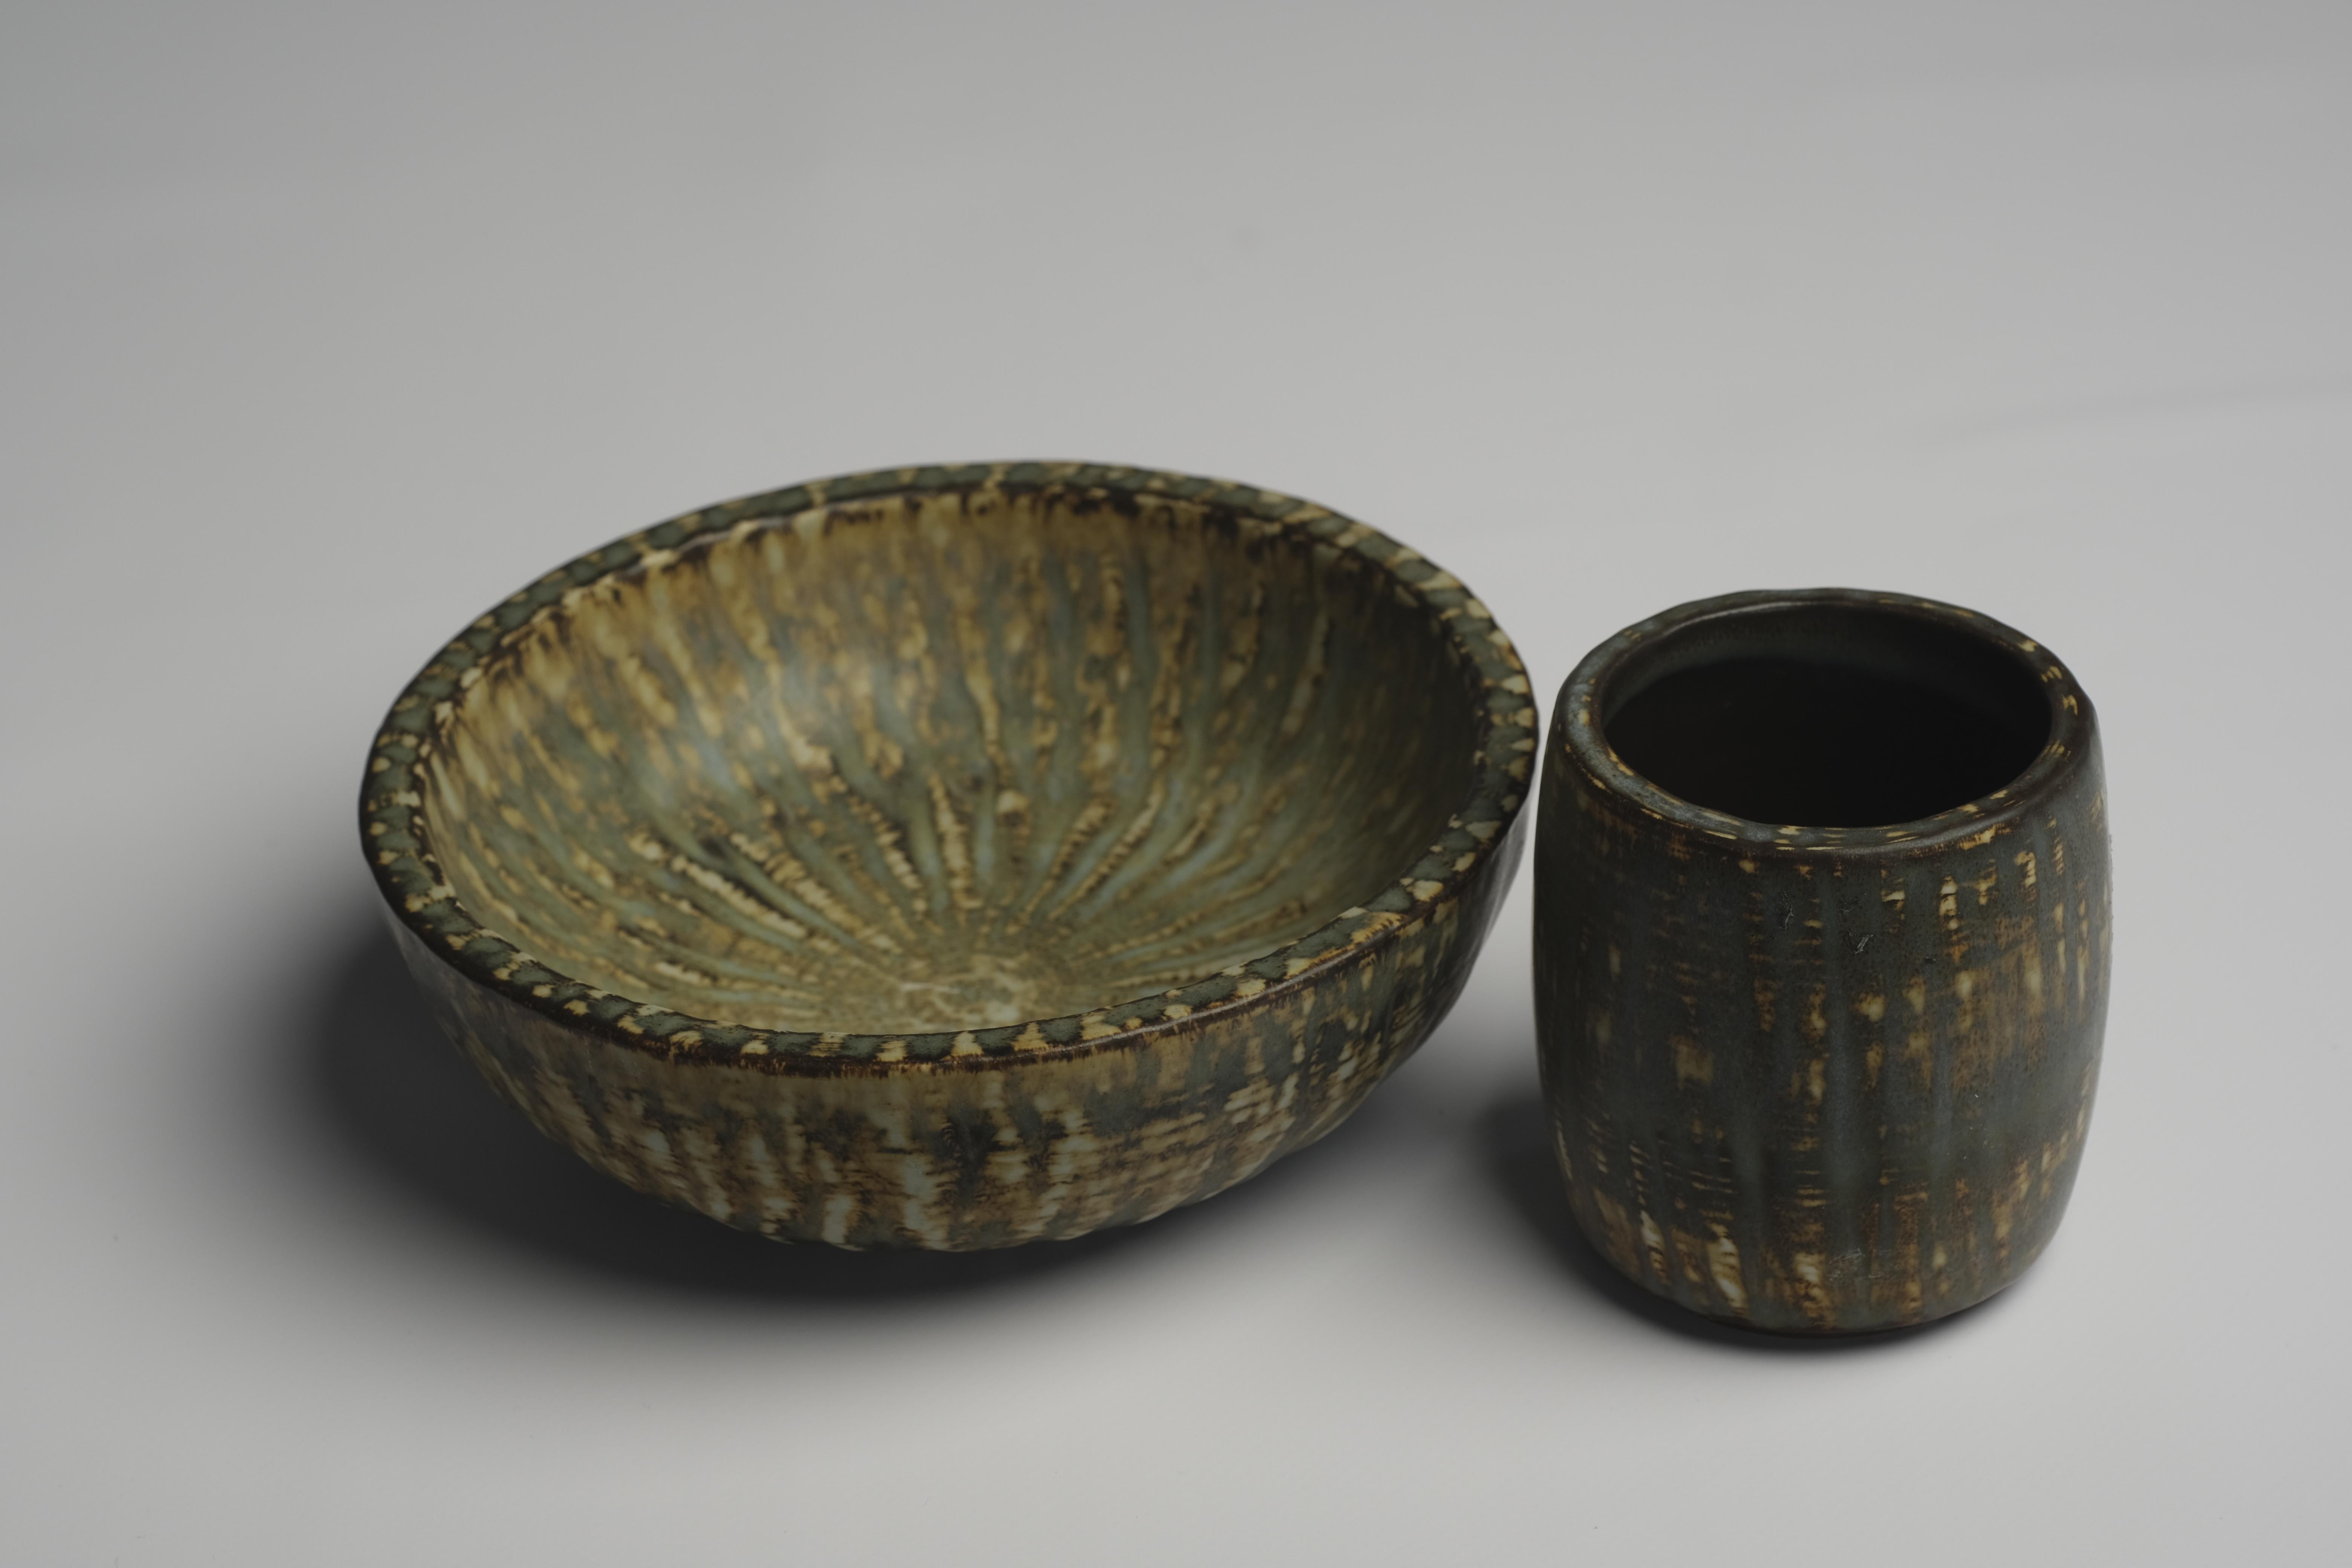 Two midcentury ceramic bowls designed and signed by Gunnar Nylund (1904-1997) for Rörstrand. Earthy wabi-sabi color and texture. 

Dimensions, diameter x height:
16 x 5.5cm and 7.2 x 8.5cm.